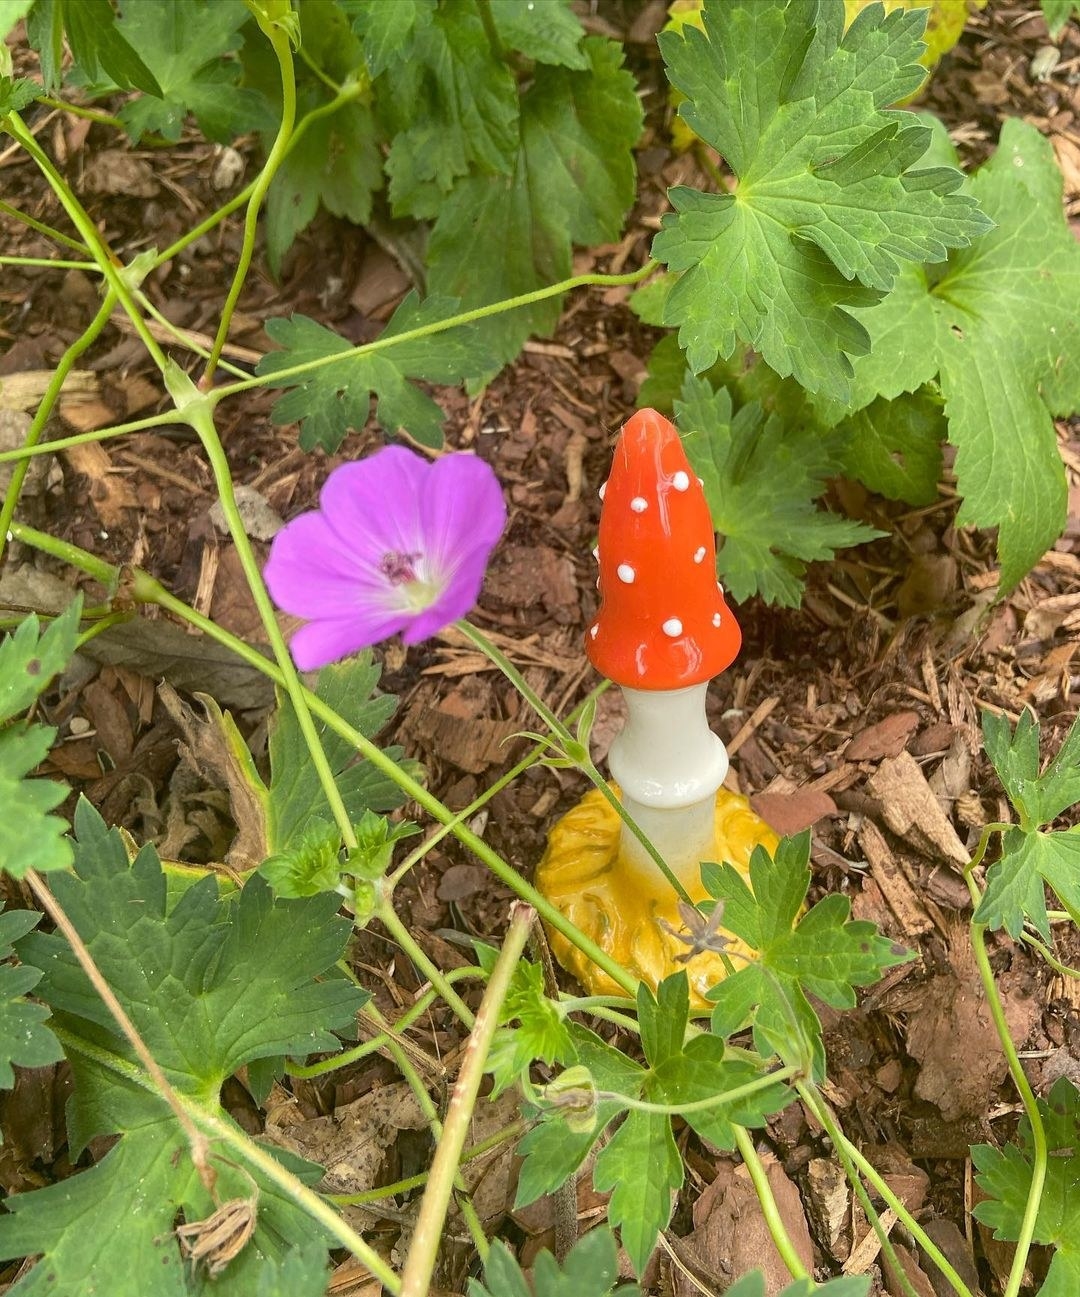 butt plug that looks like red capped mushroom with yellow base 